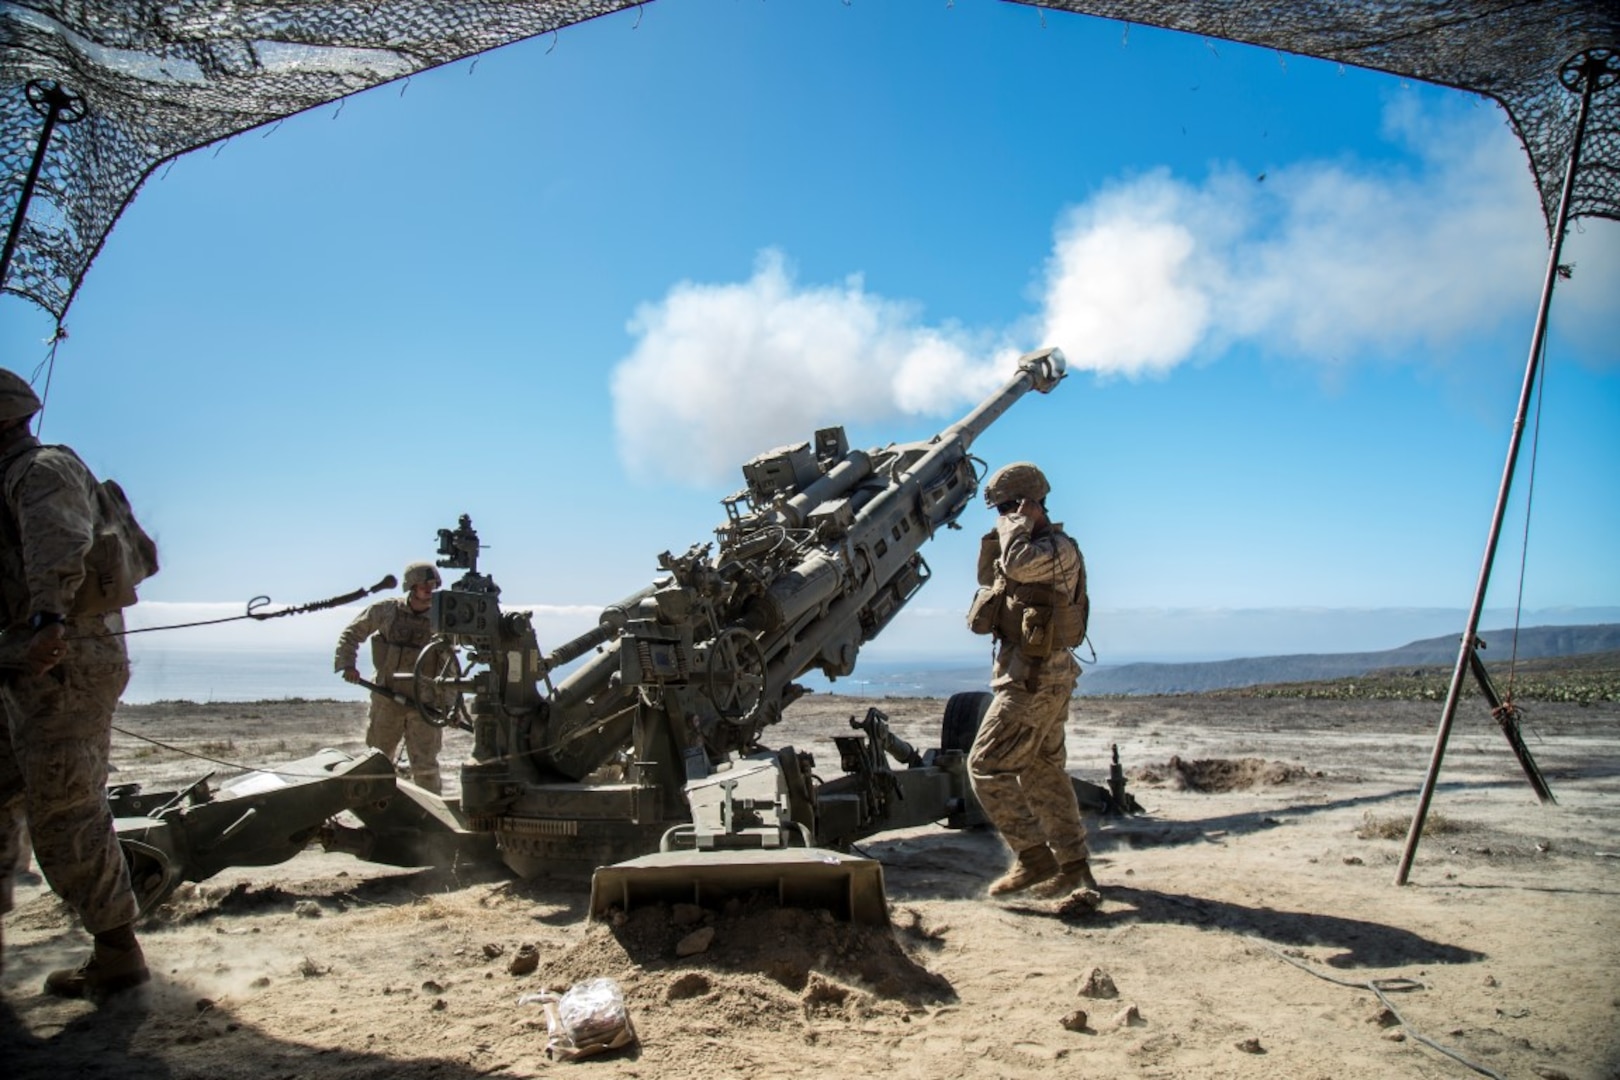 A U.S. Marine with Battery “B”, 2nd Battalion, 1st Marine Regiment, fires a M777A2 Howitzer during Composite Training Unit Exercise (COMPTUEX) at San Clemente Island, Calif., on Oct. 22, 2015. COMPTUEX provides the PHIBRON-MEU the opportunity to integrate planning while also allowing focused, mission-specific training and evaluation for the Marines and their Navy Counterparts. (U.S. Marine Corps photo by Sgt. Hector de Jesus/Released)